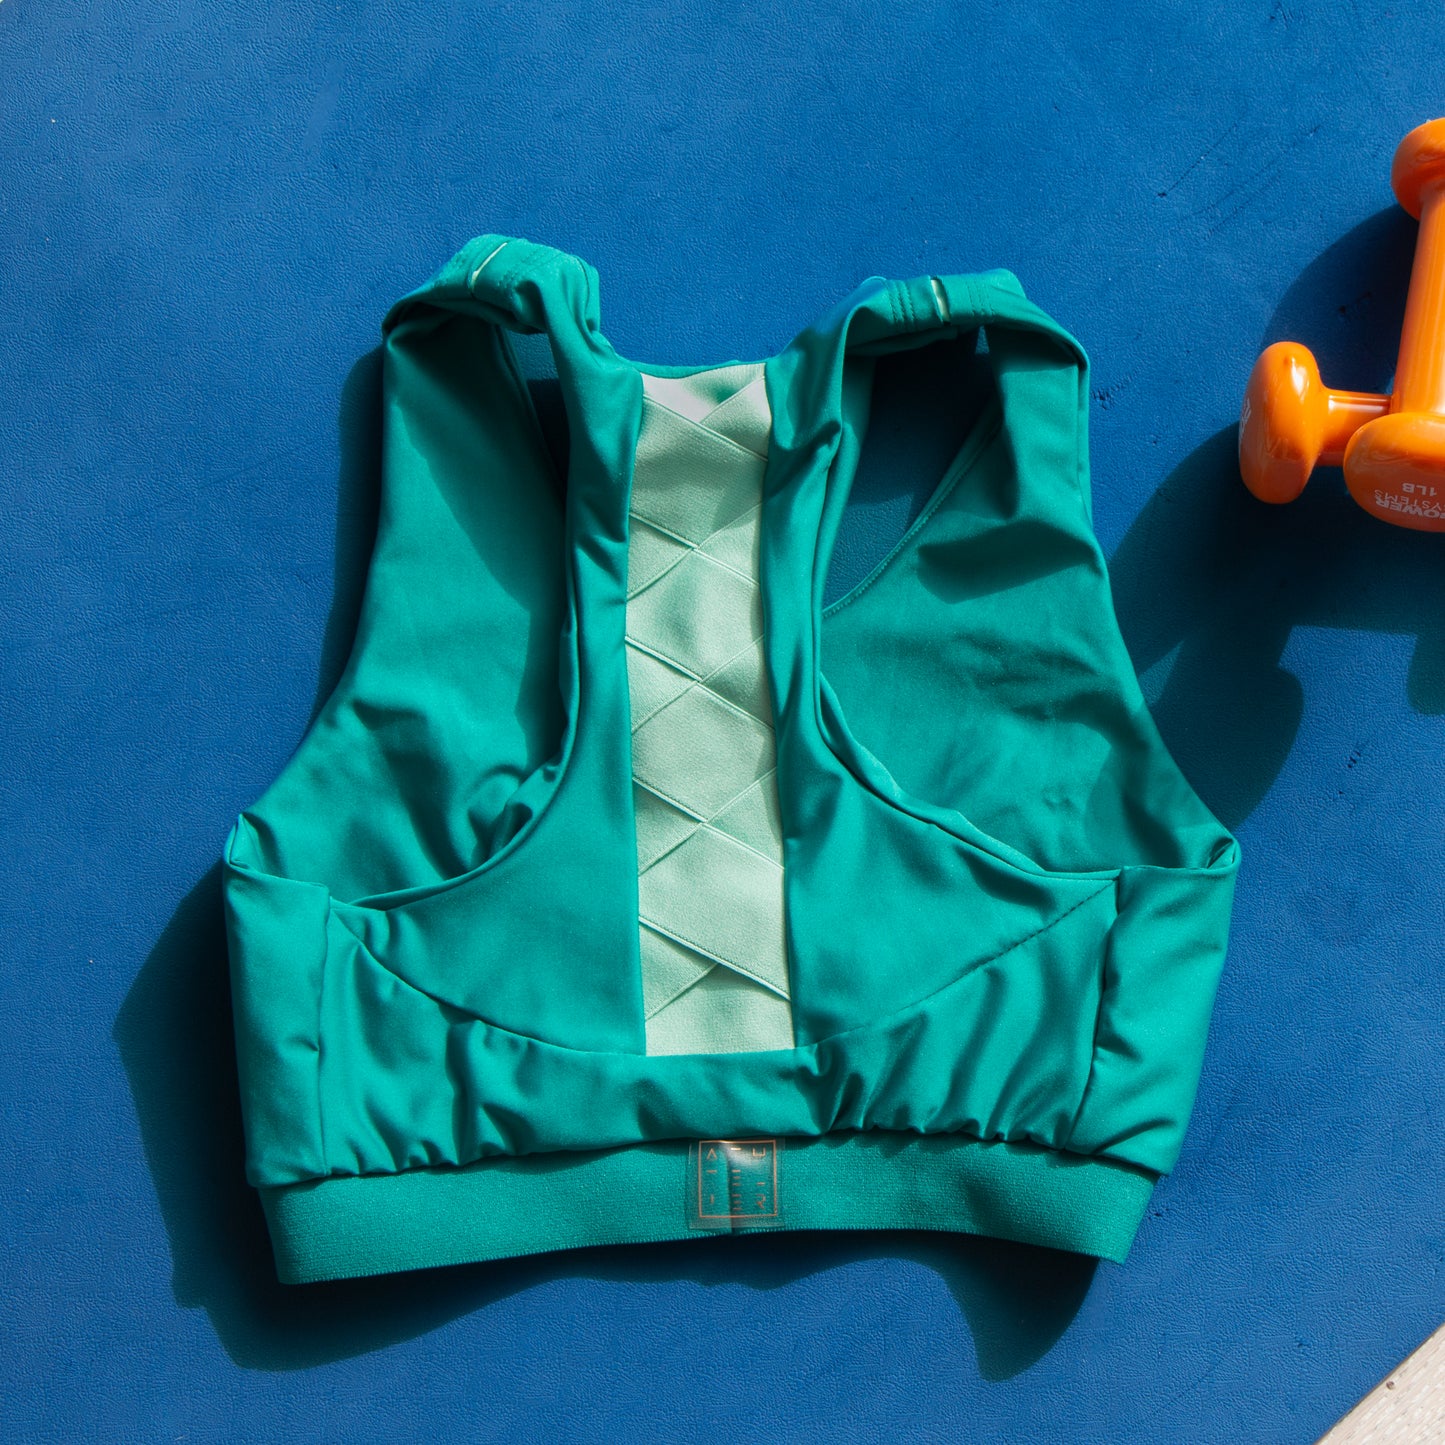 a photo of a green and jade sports bra laying on a blue yoga mat with orange dumbells beside it